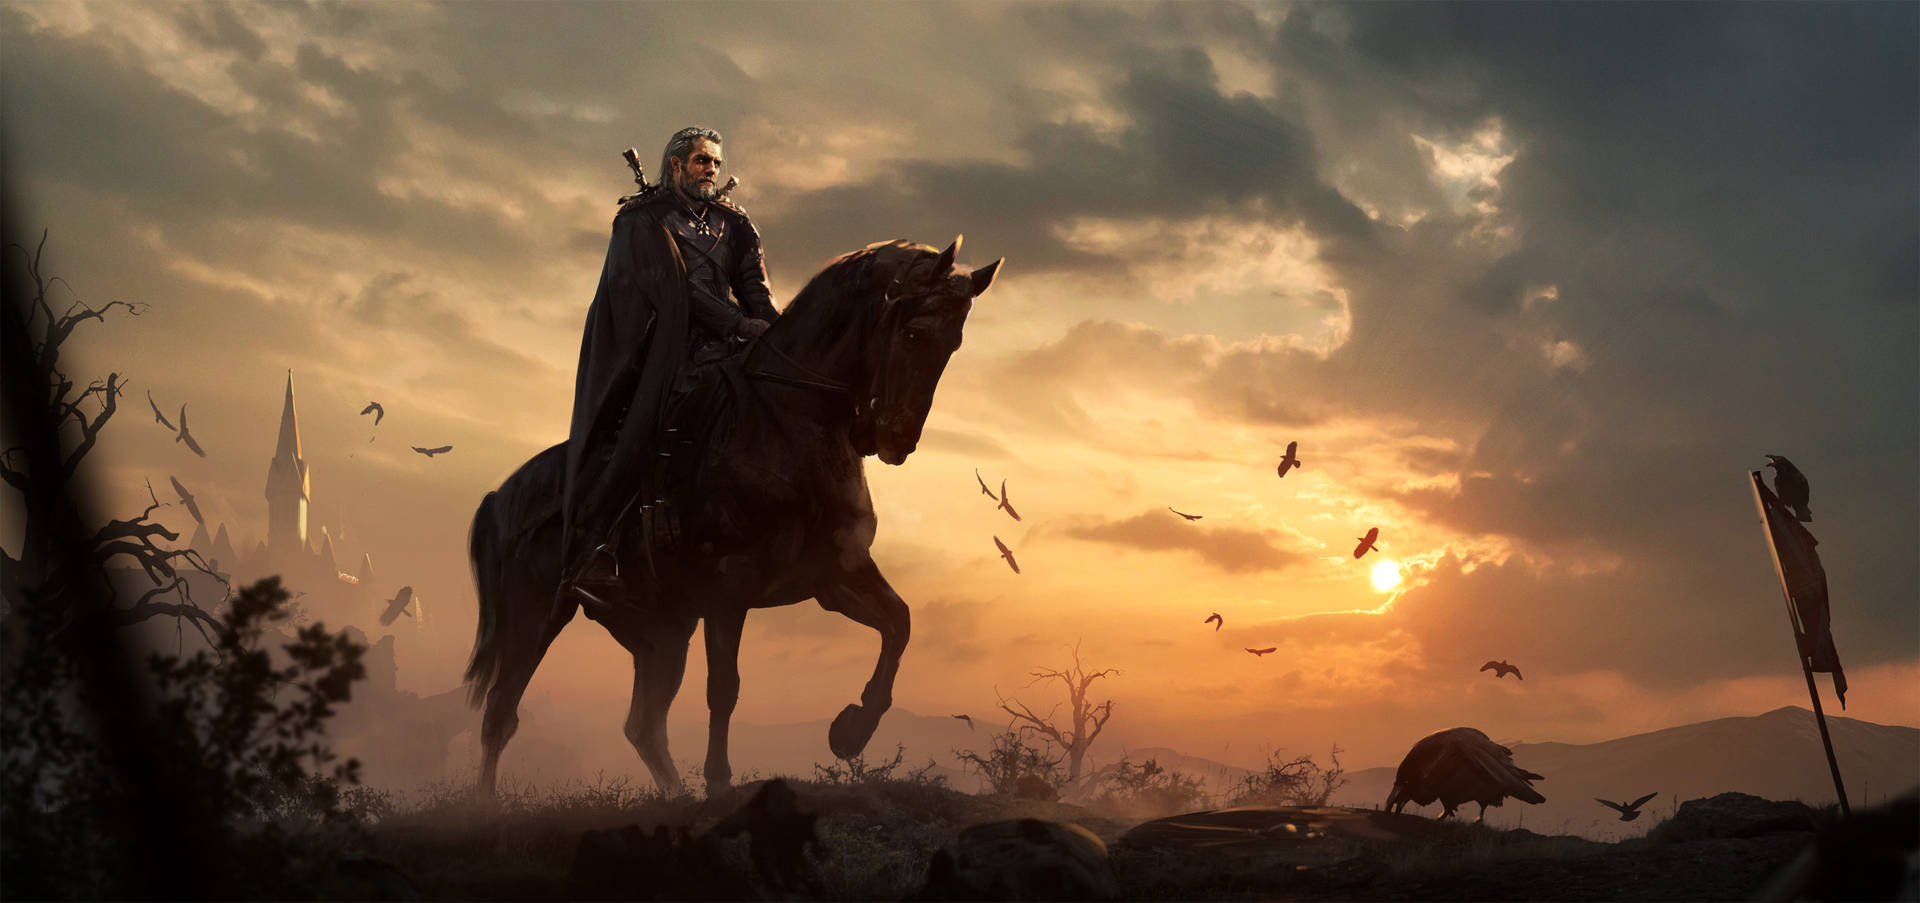 Geralt of Rivia takes a journey on horseback in the vast world of The Witcher 3. Wallpaper